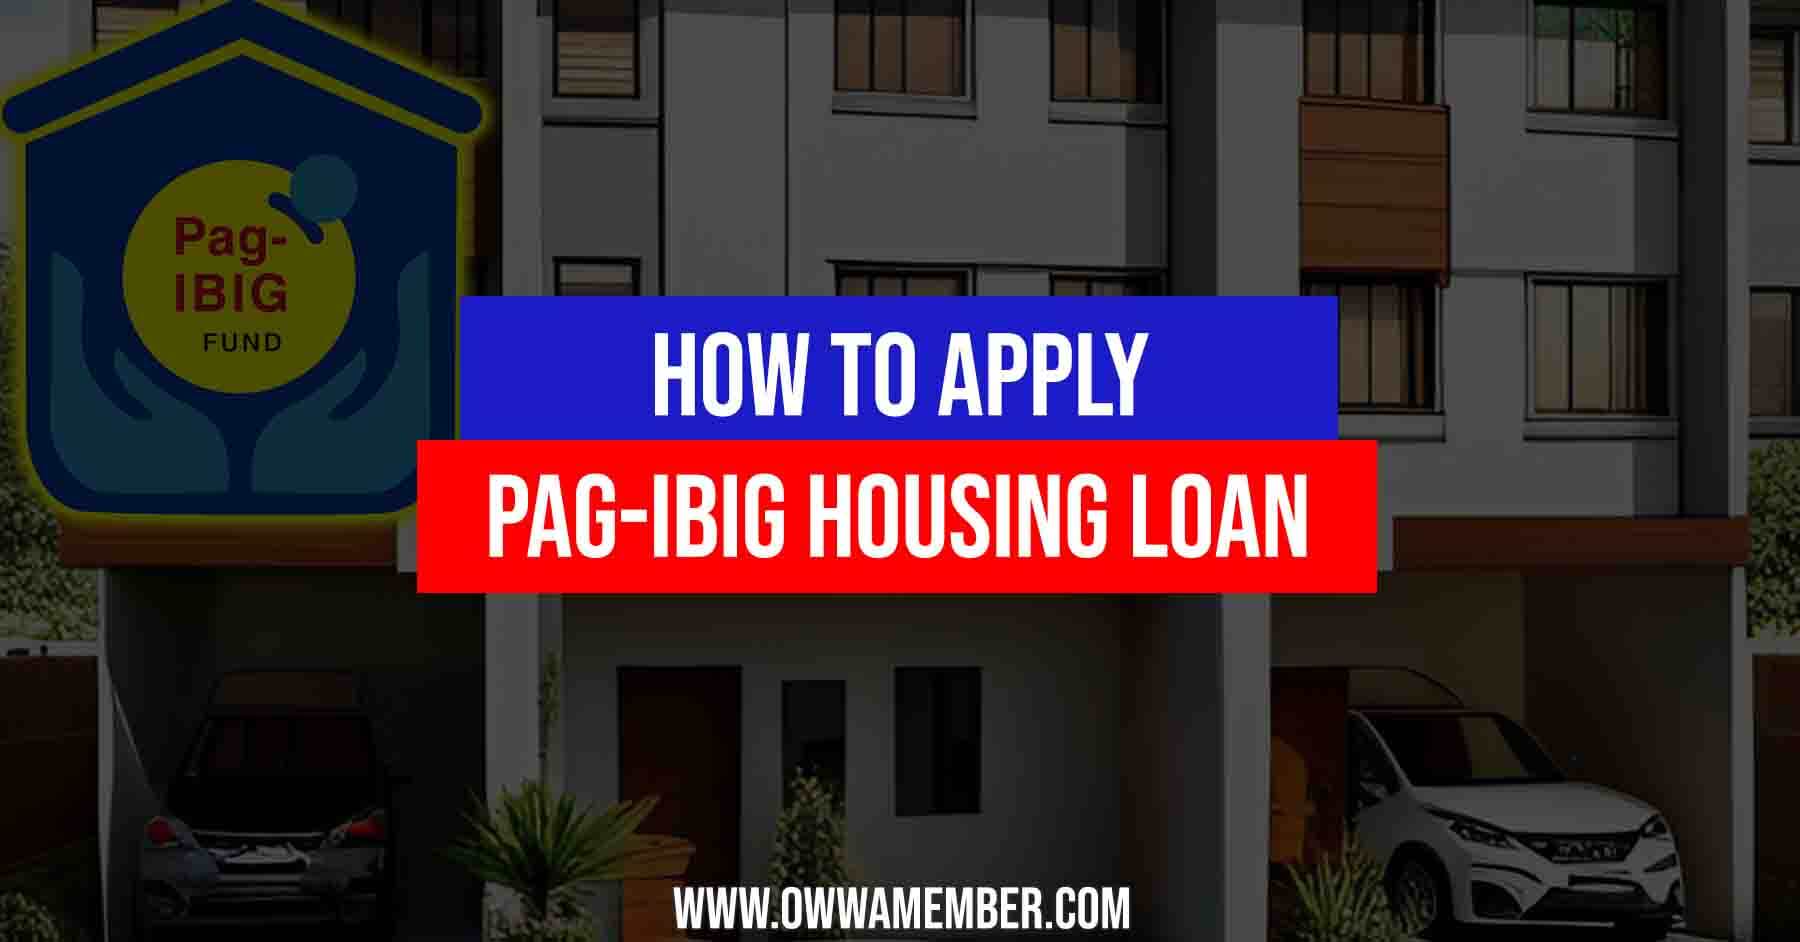 how to apply for pagibig housing loan